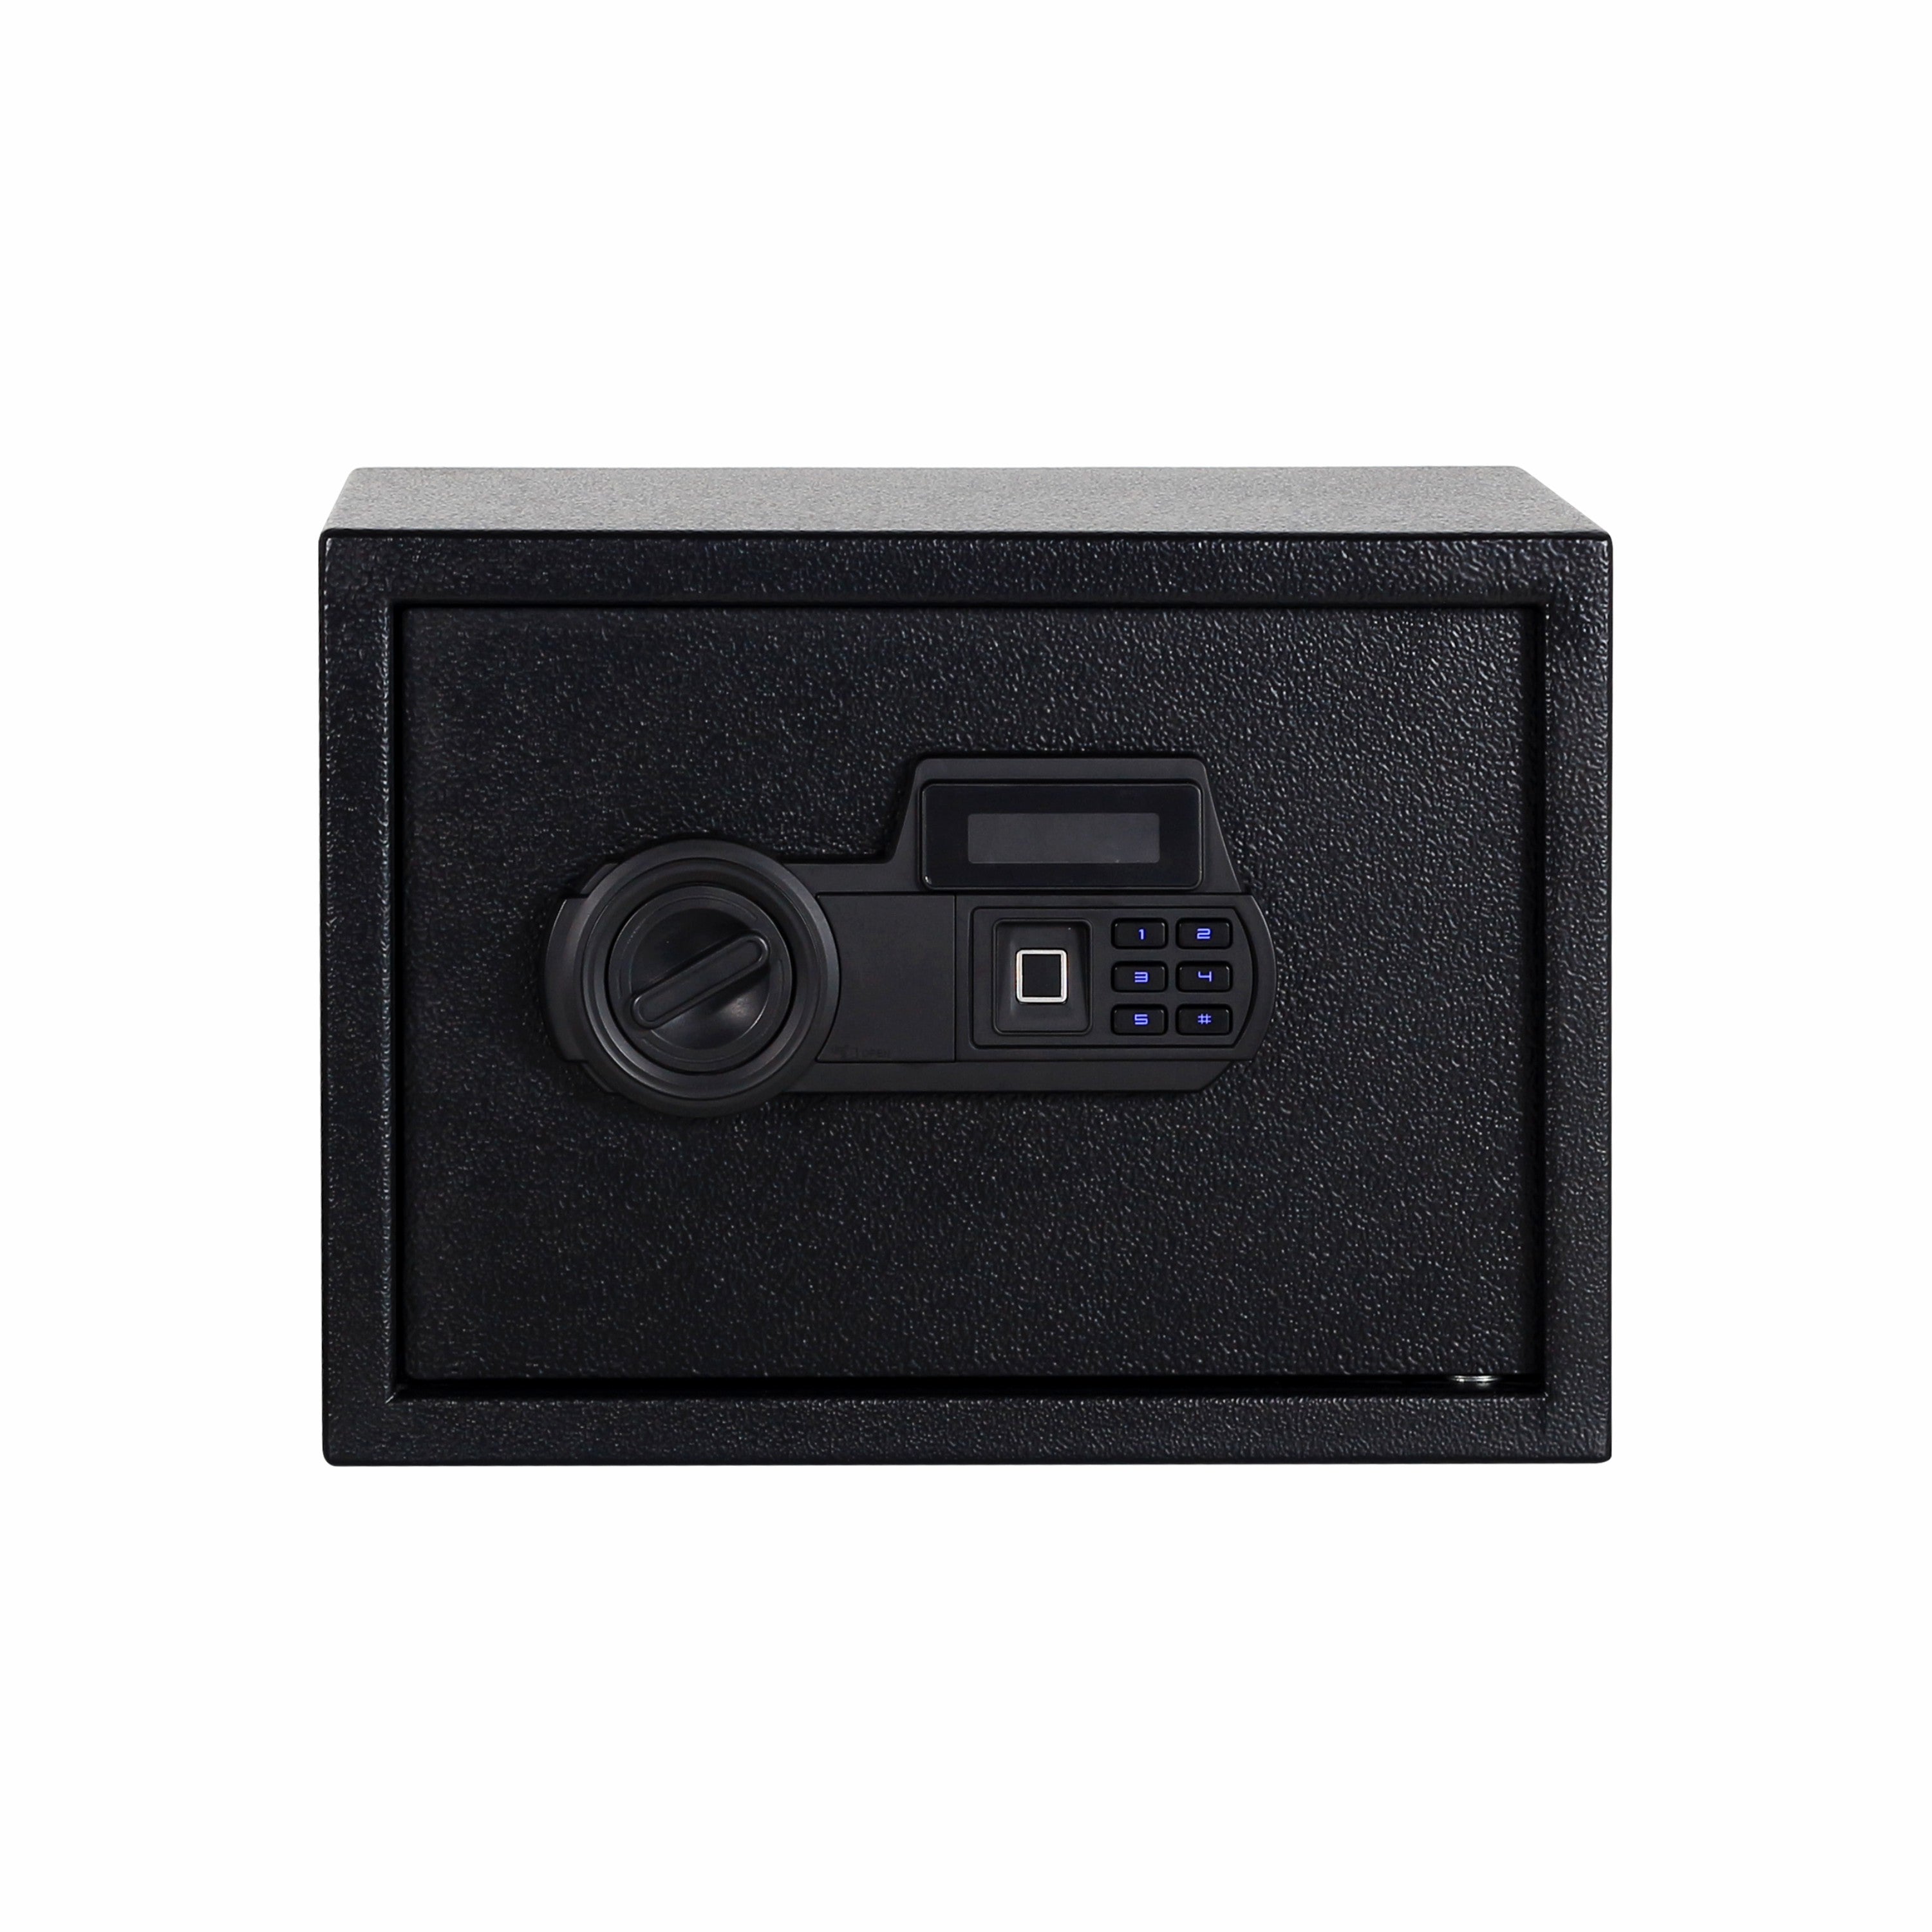 Ozone Biometric Safe for Homes & Offices | 3-way Access | Fingerprint, Password & Emergency Key (Black & Grey, 16 Ltrs.)